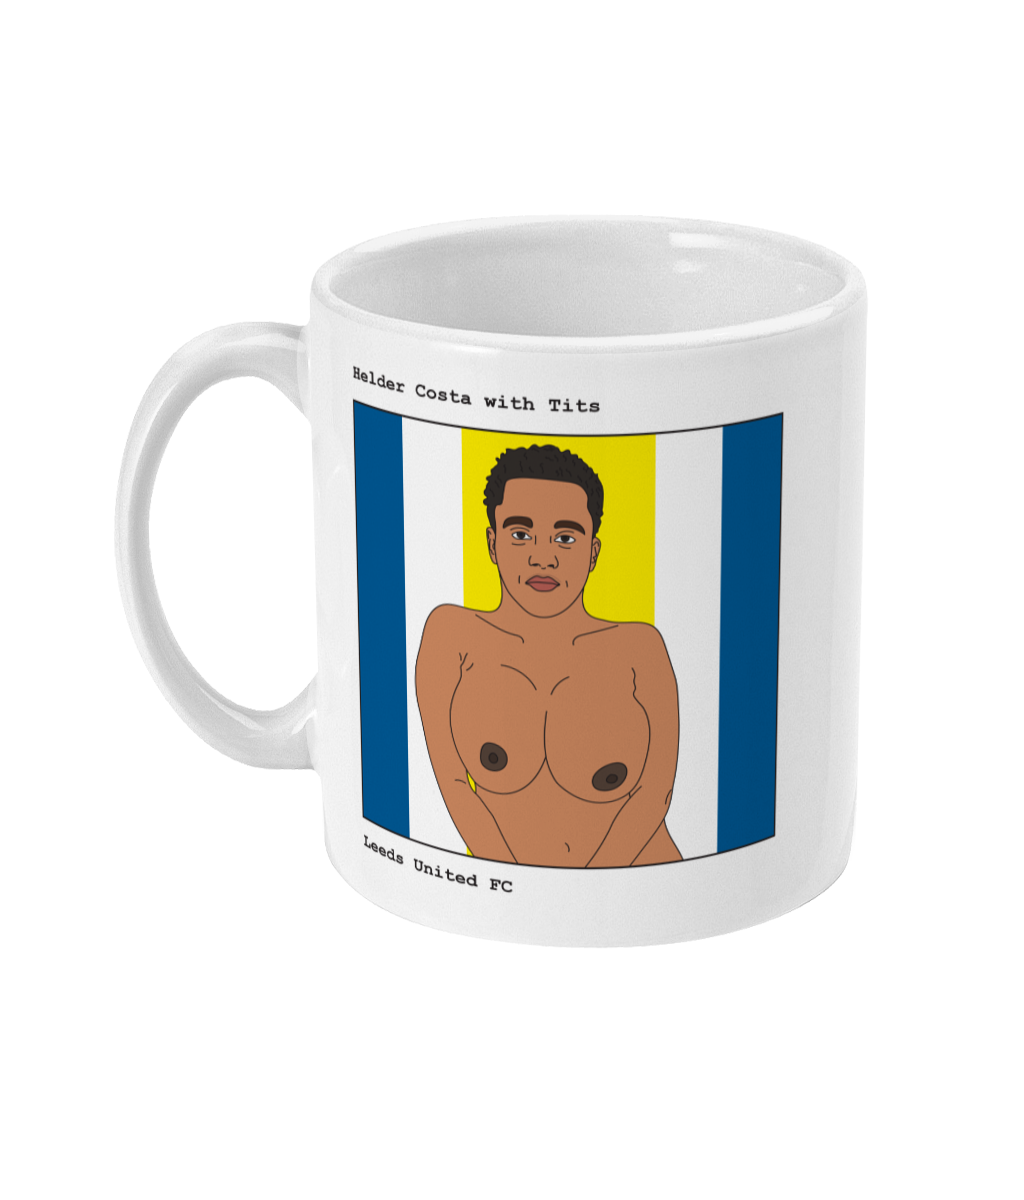 Hélder Costa with Tits - Footballers with Tits